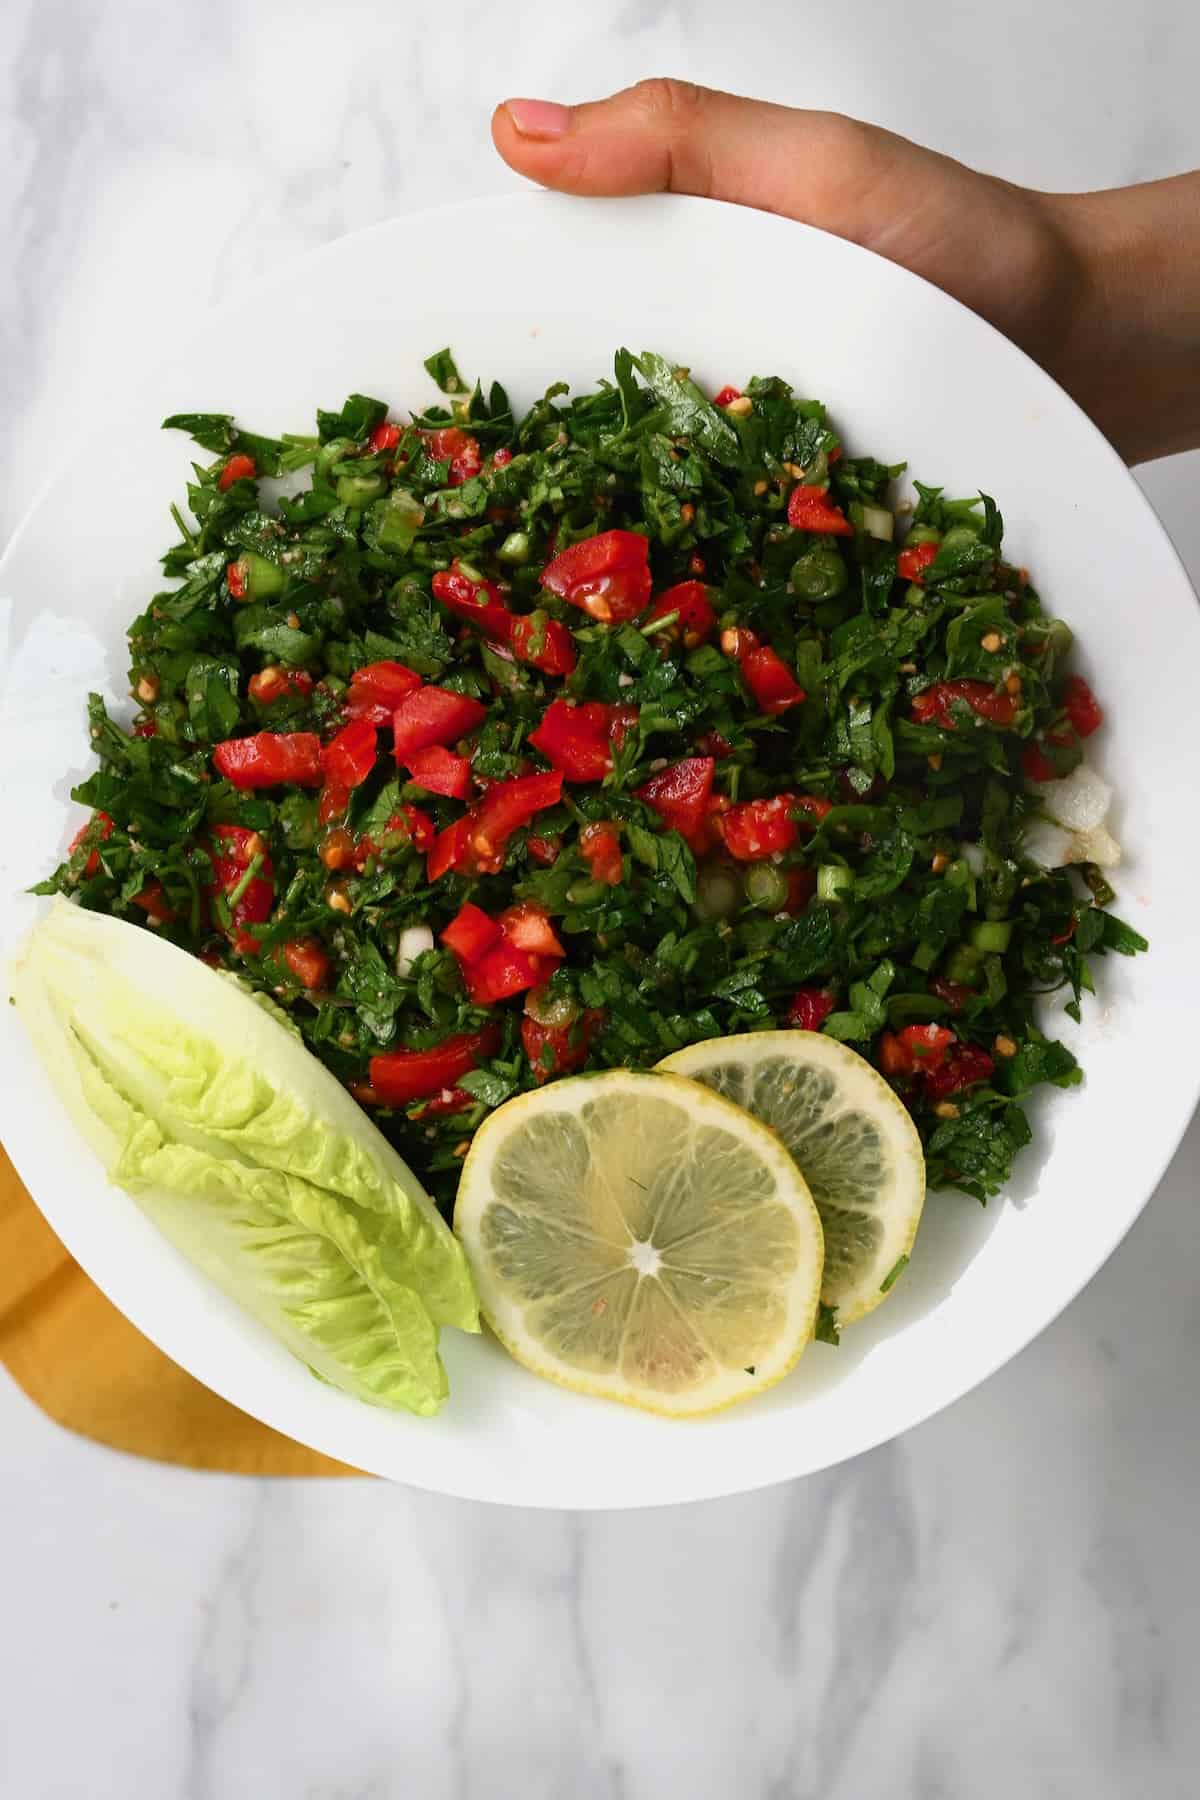 A serving of tabbouleh salad with slices of lemon